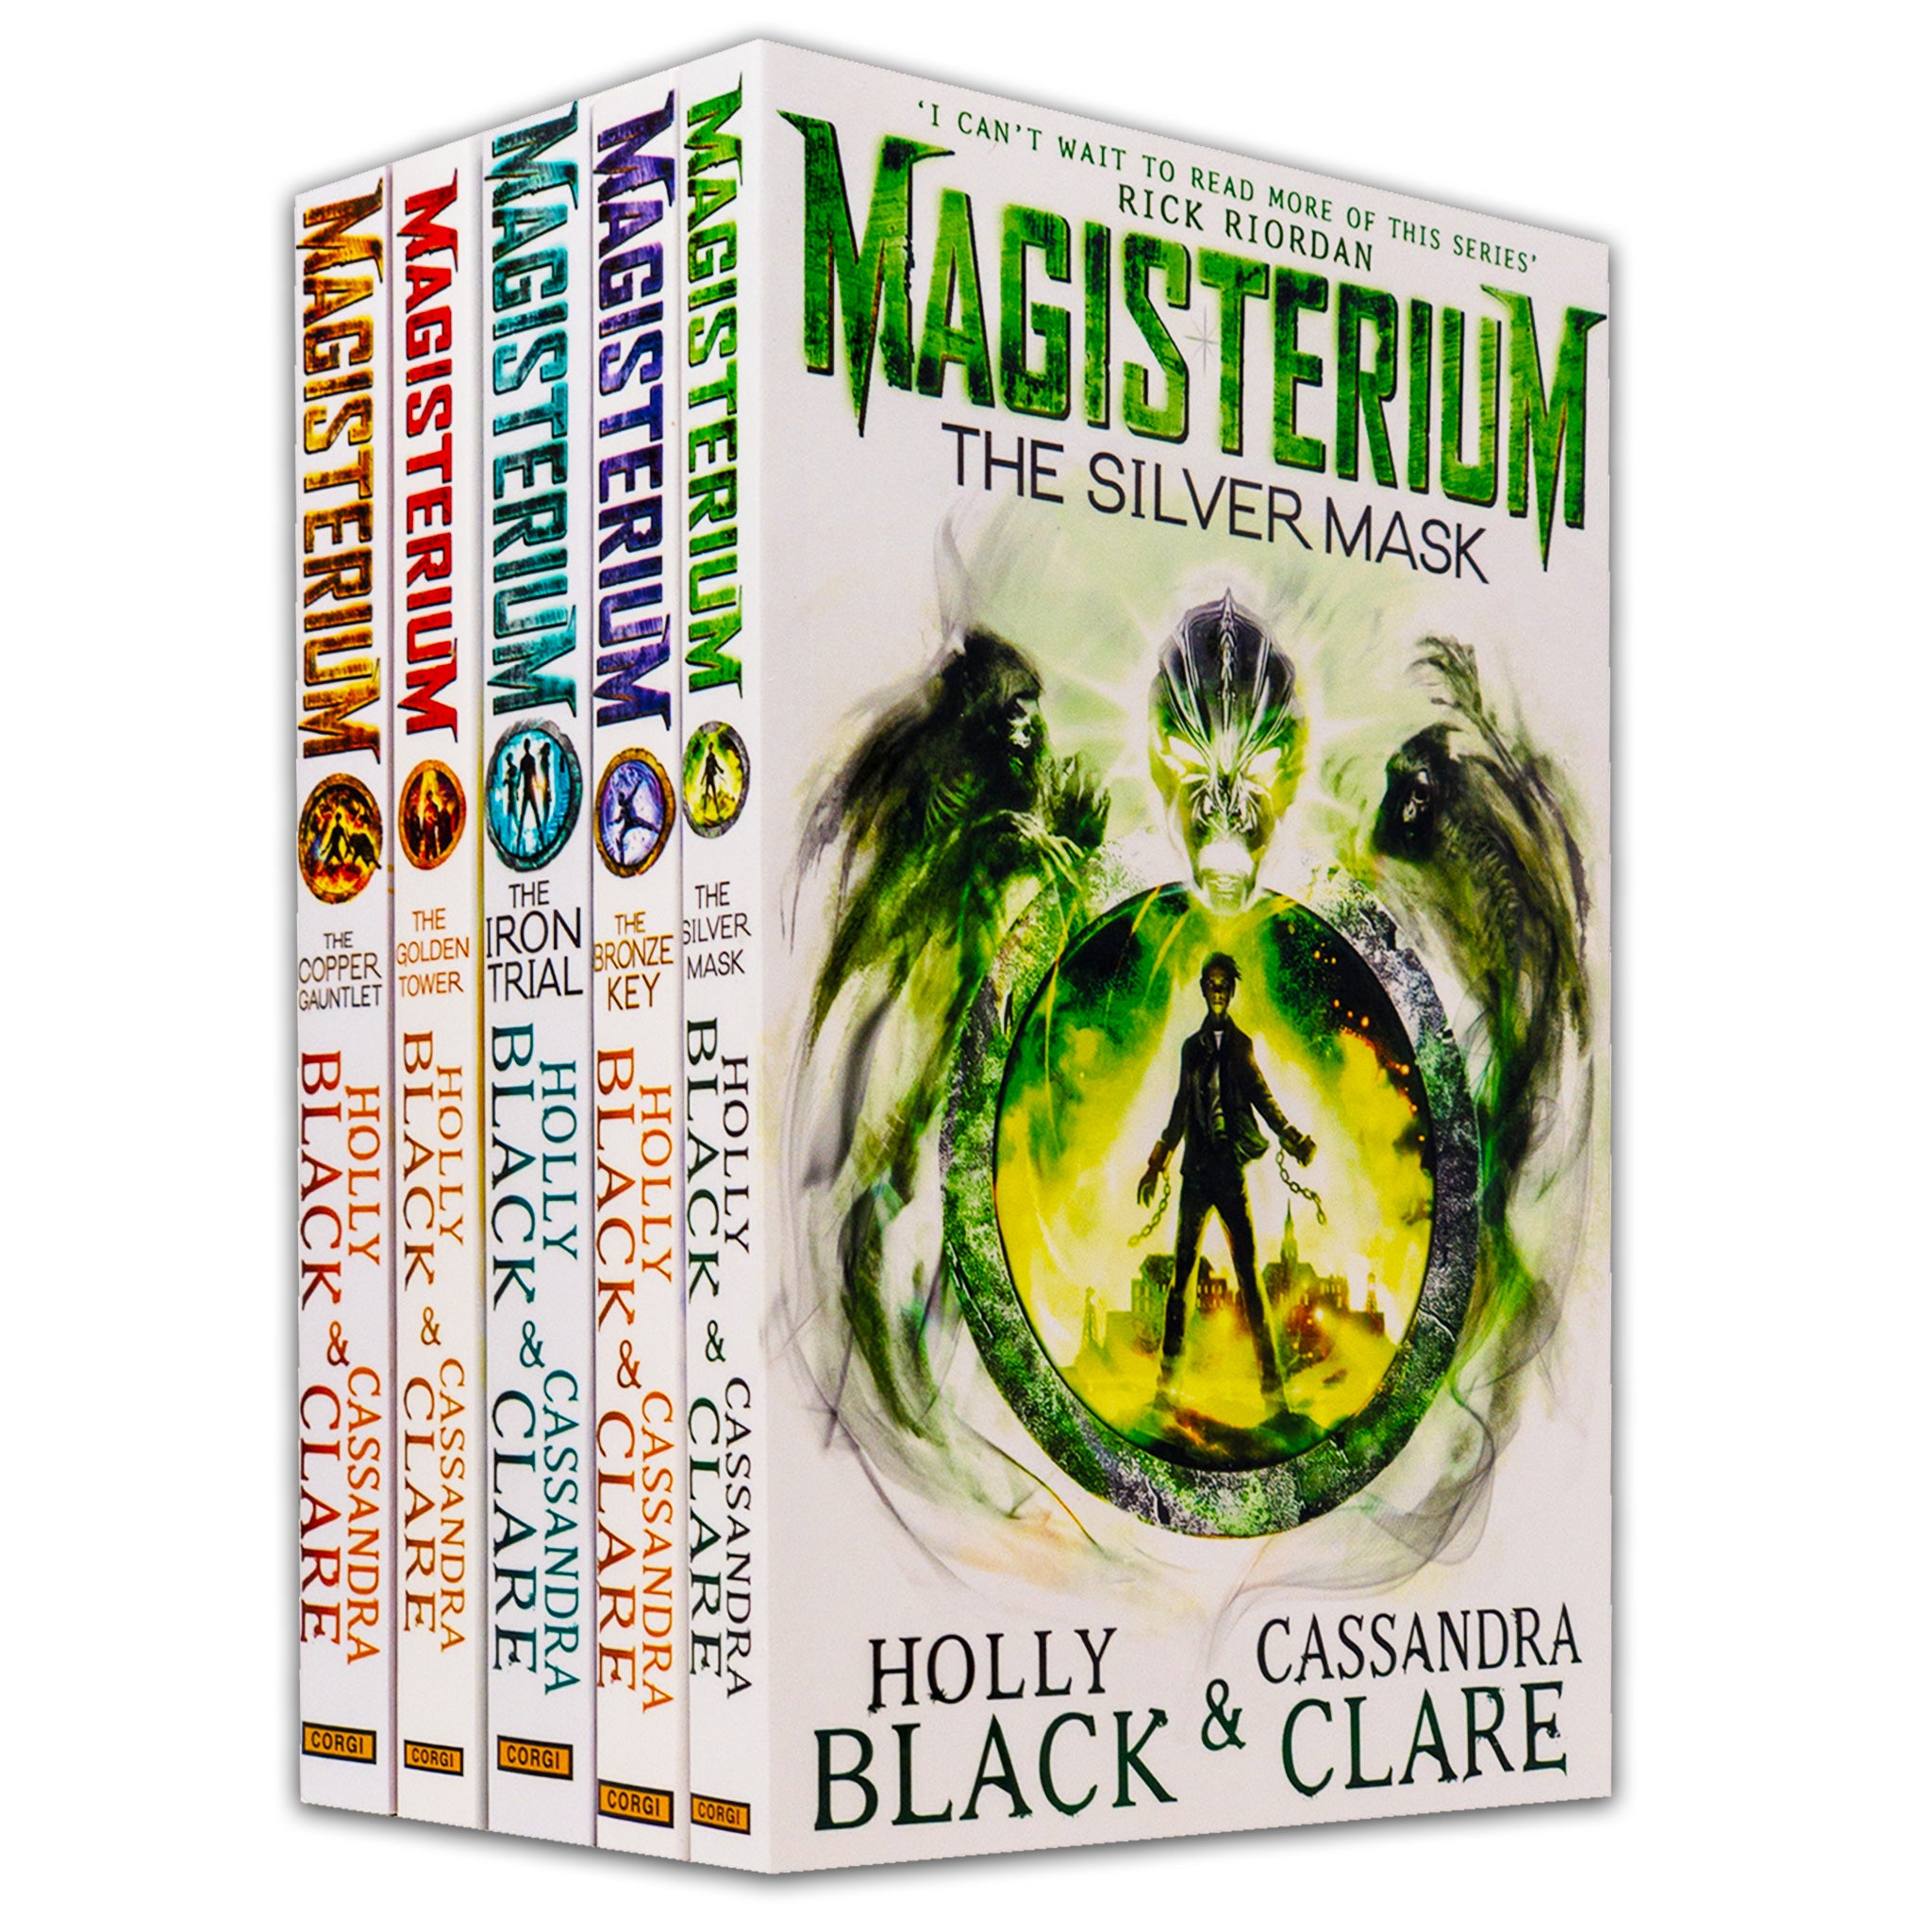 The Magisterium Series Books (The Iron Trial, The Copper